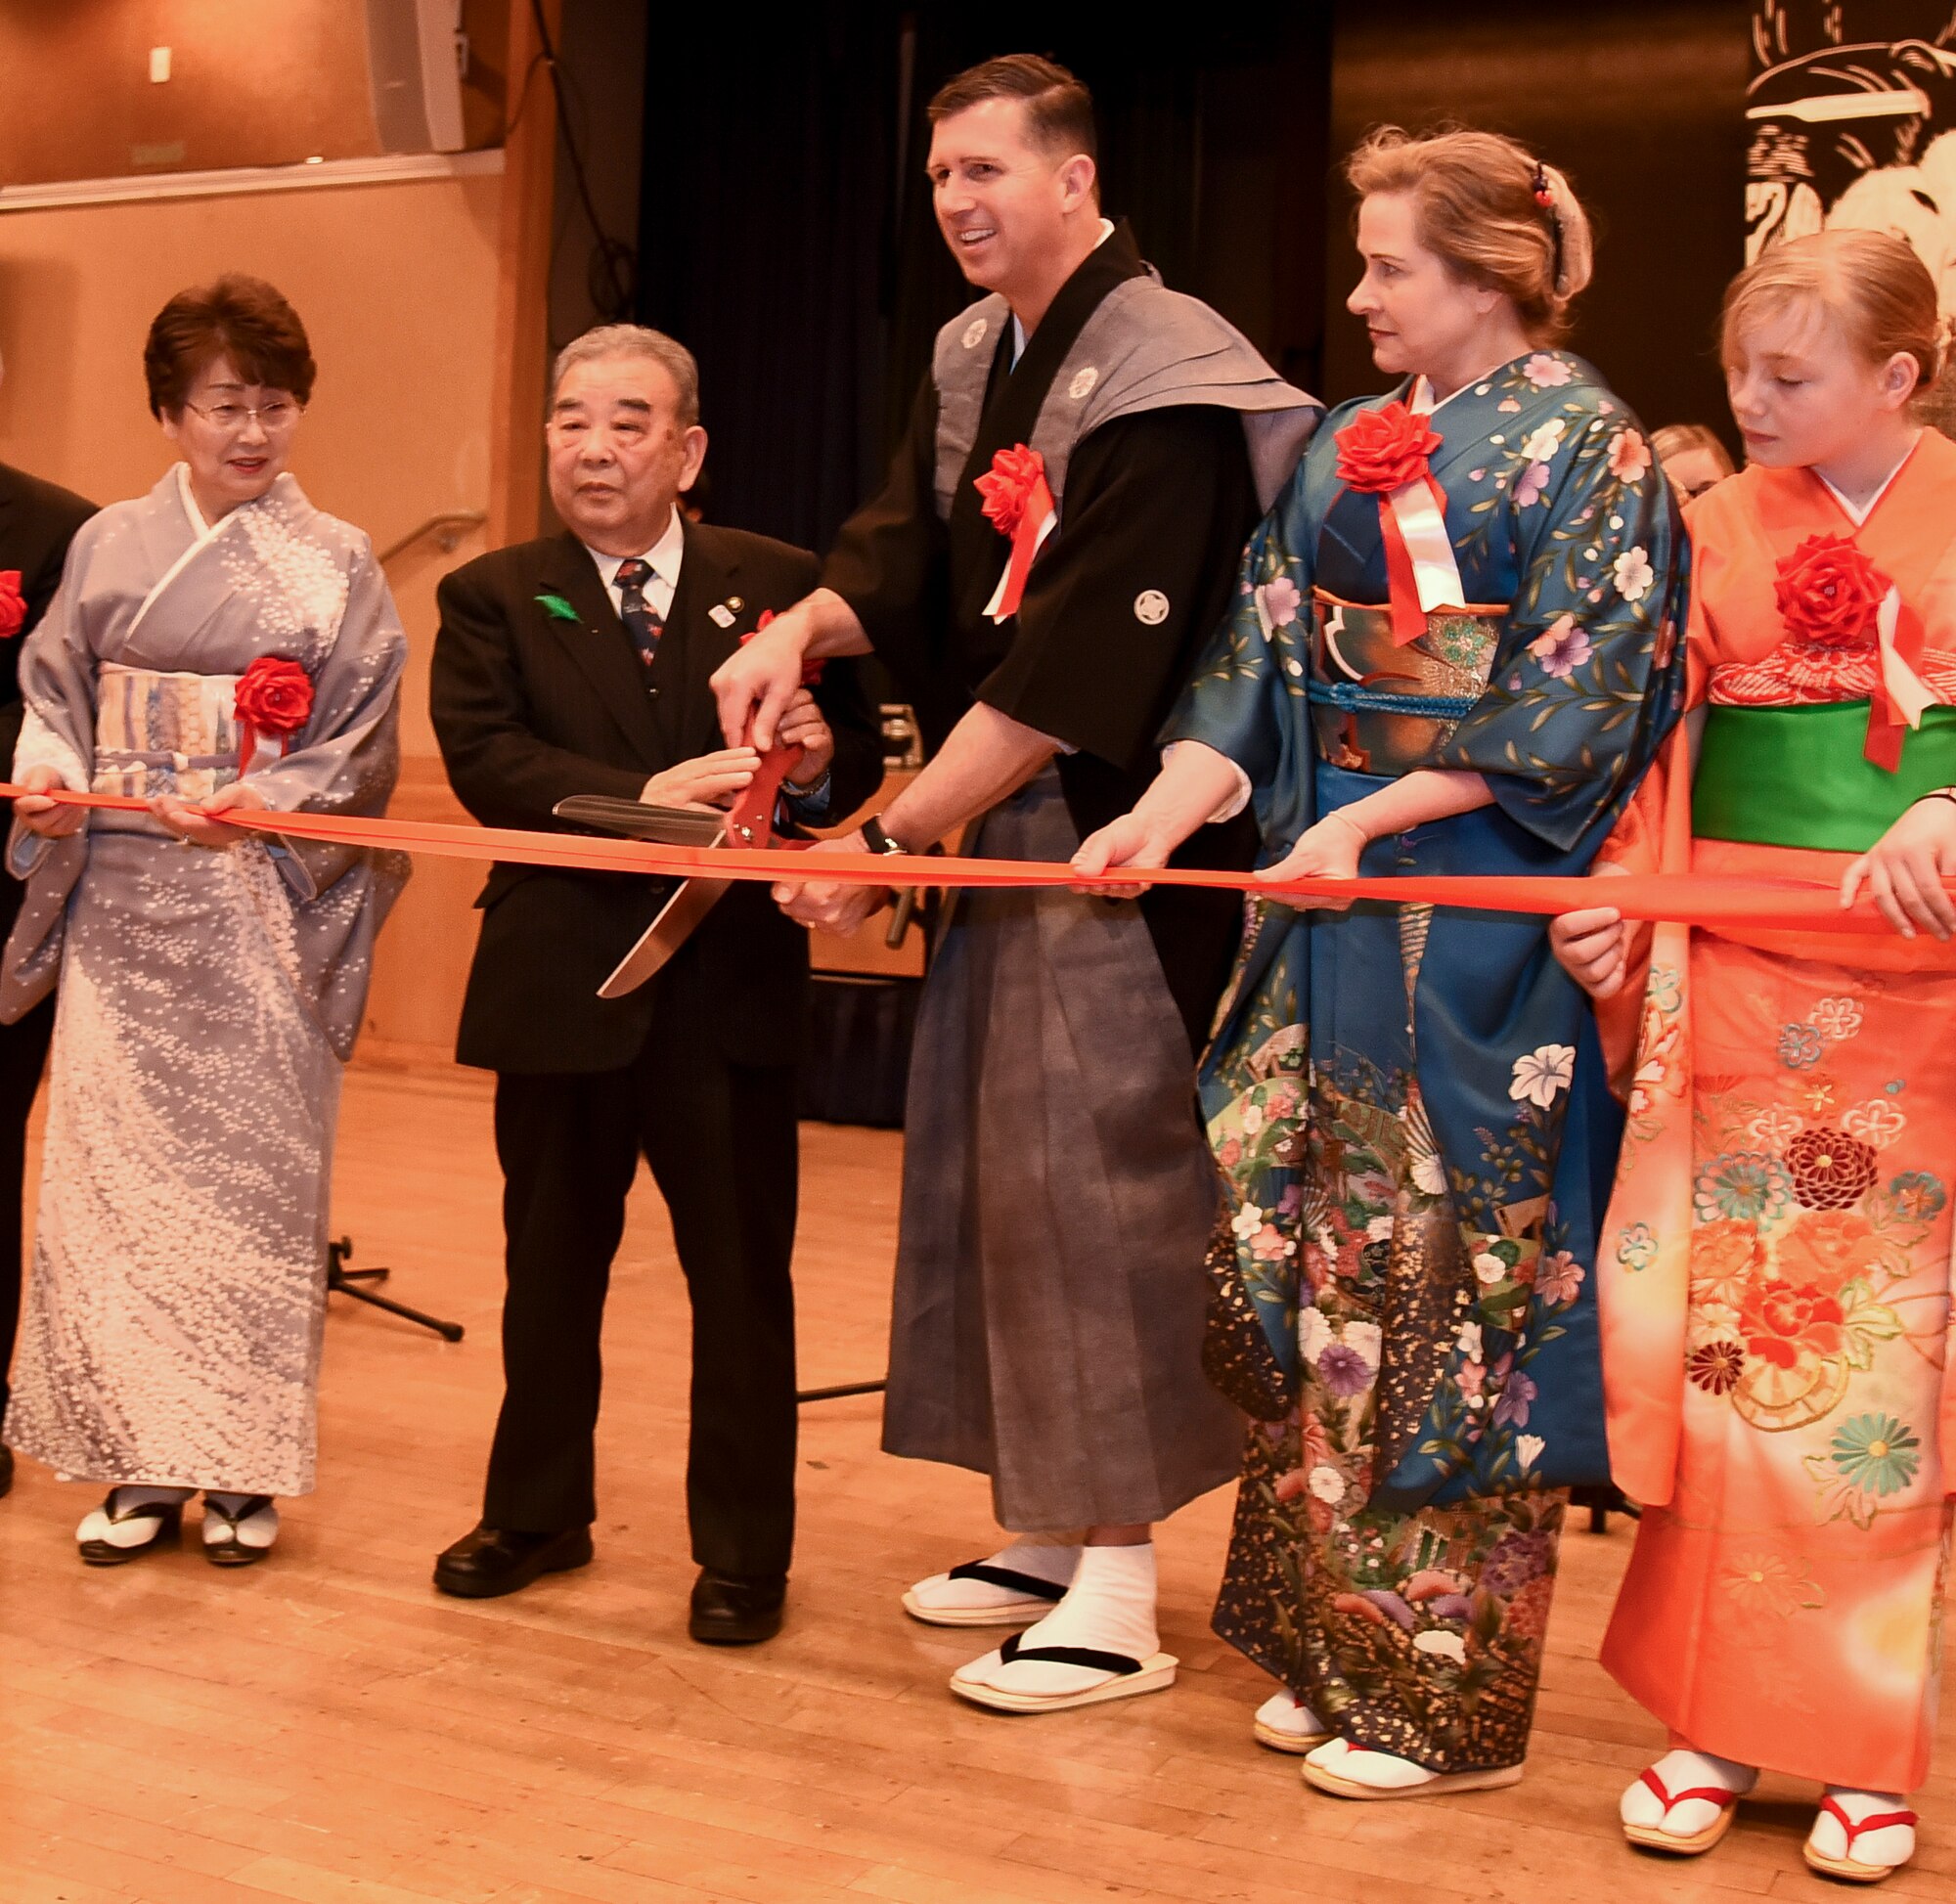 Kazumasa Taneichi, center left, the Misawa City mayor, and U.S. Air Force Col. Jason J. Cockrum, center right, the 35th Operations Group commander, cut the ribbon marking the beginning of the 32nd Annual Japan Day at Misawa Air Base, Japan, April 6, 2019. The Misawa International Club and Misawa AB leadership held their first Japan Day in 1988 to strengthen the community and share Japanese heritage. Conducting annual bilateral events reinforces the more than 60-year relationship that helps preserve peace and stability across the Indo-Pacific region. (U.S. Air Force photo by Branden Yamada)